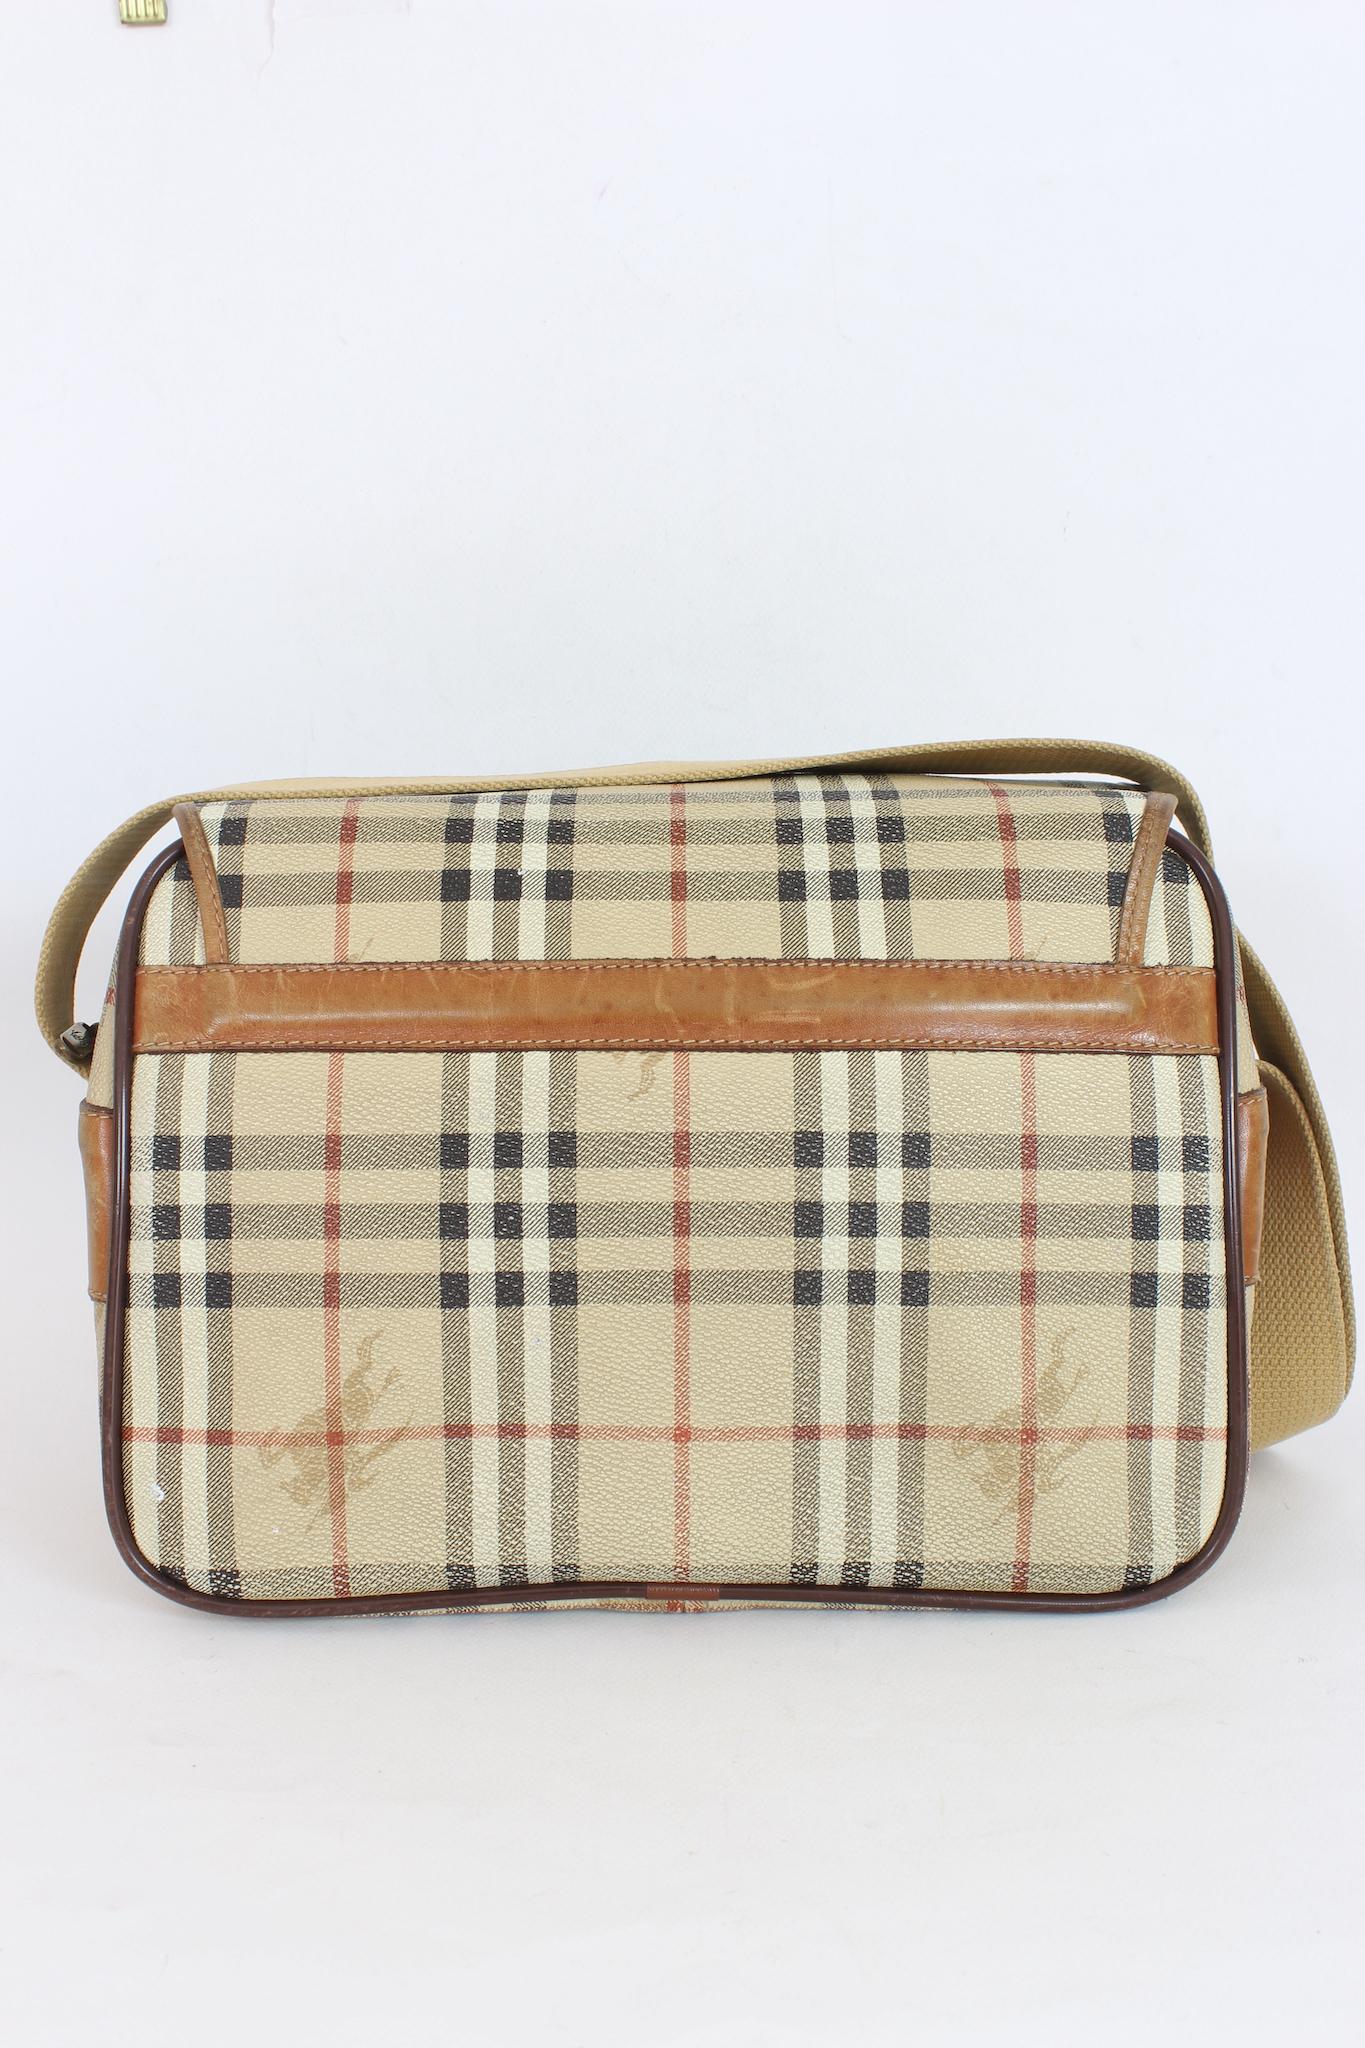 Burberry Vintage 80s Beige Leather Check Trunk Bag 1